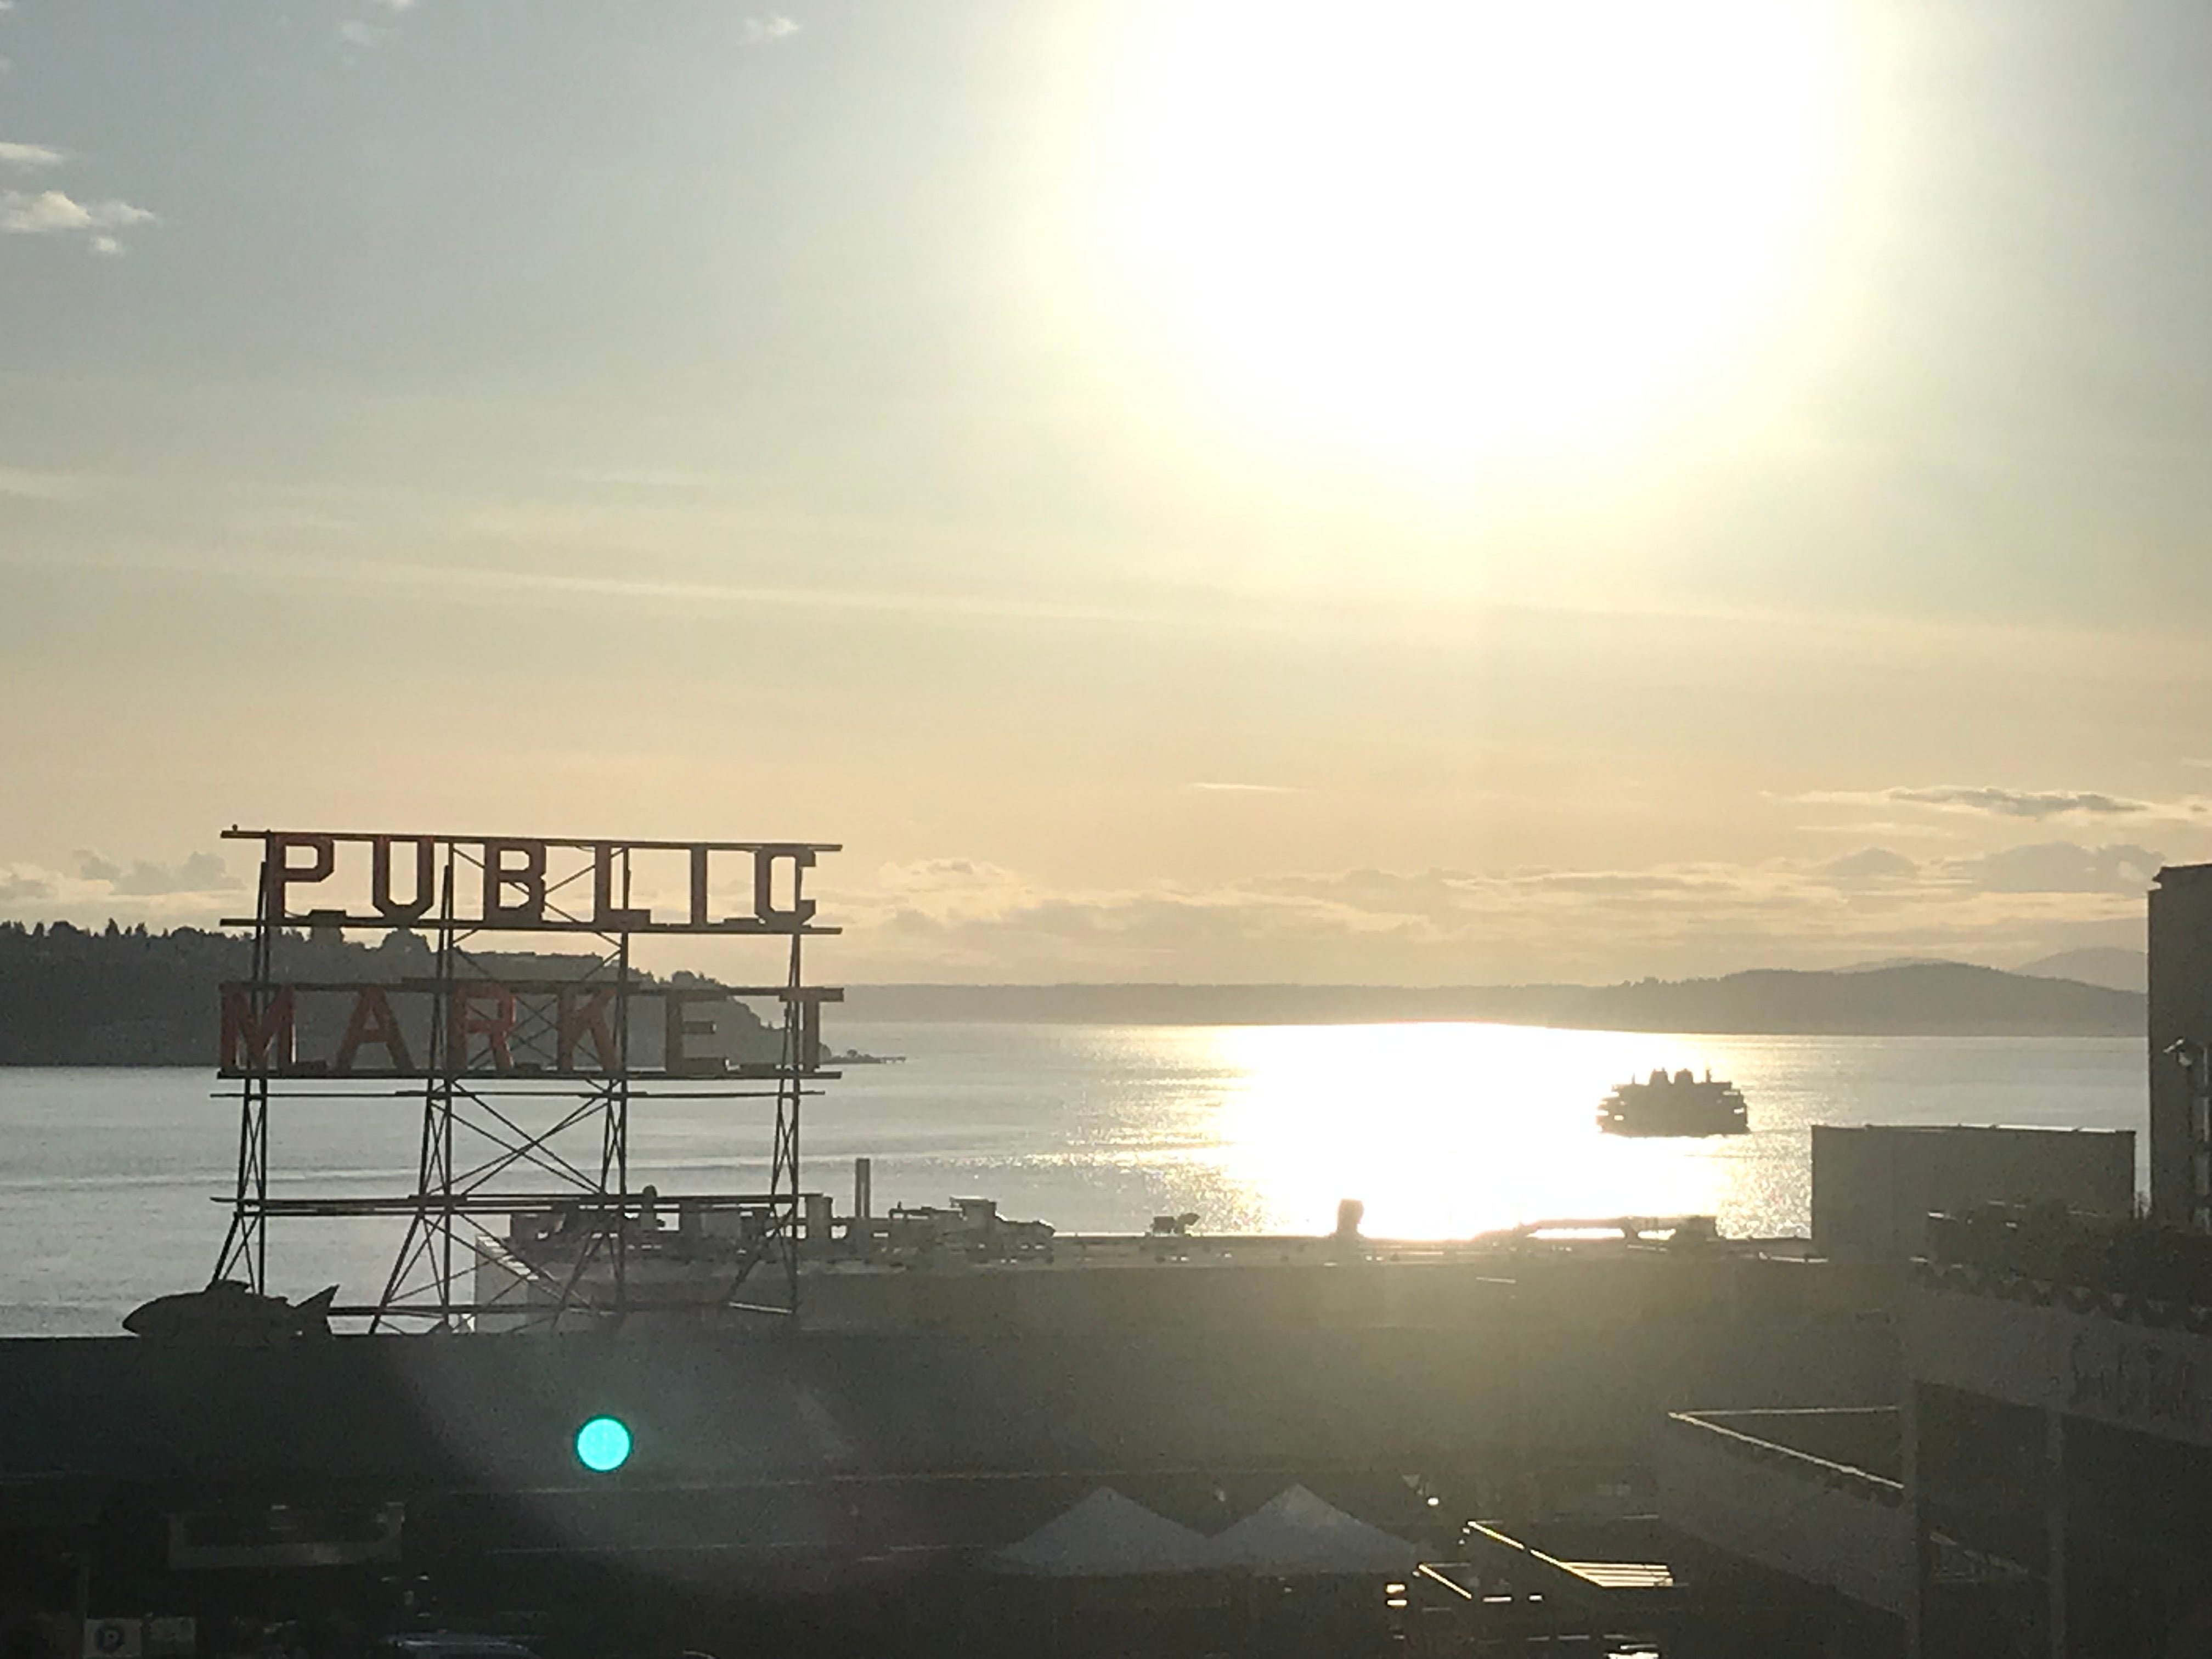 Pike Place Public Market sign at sunset.